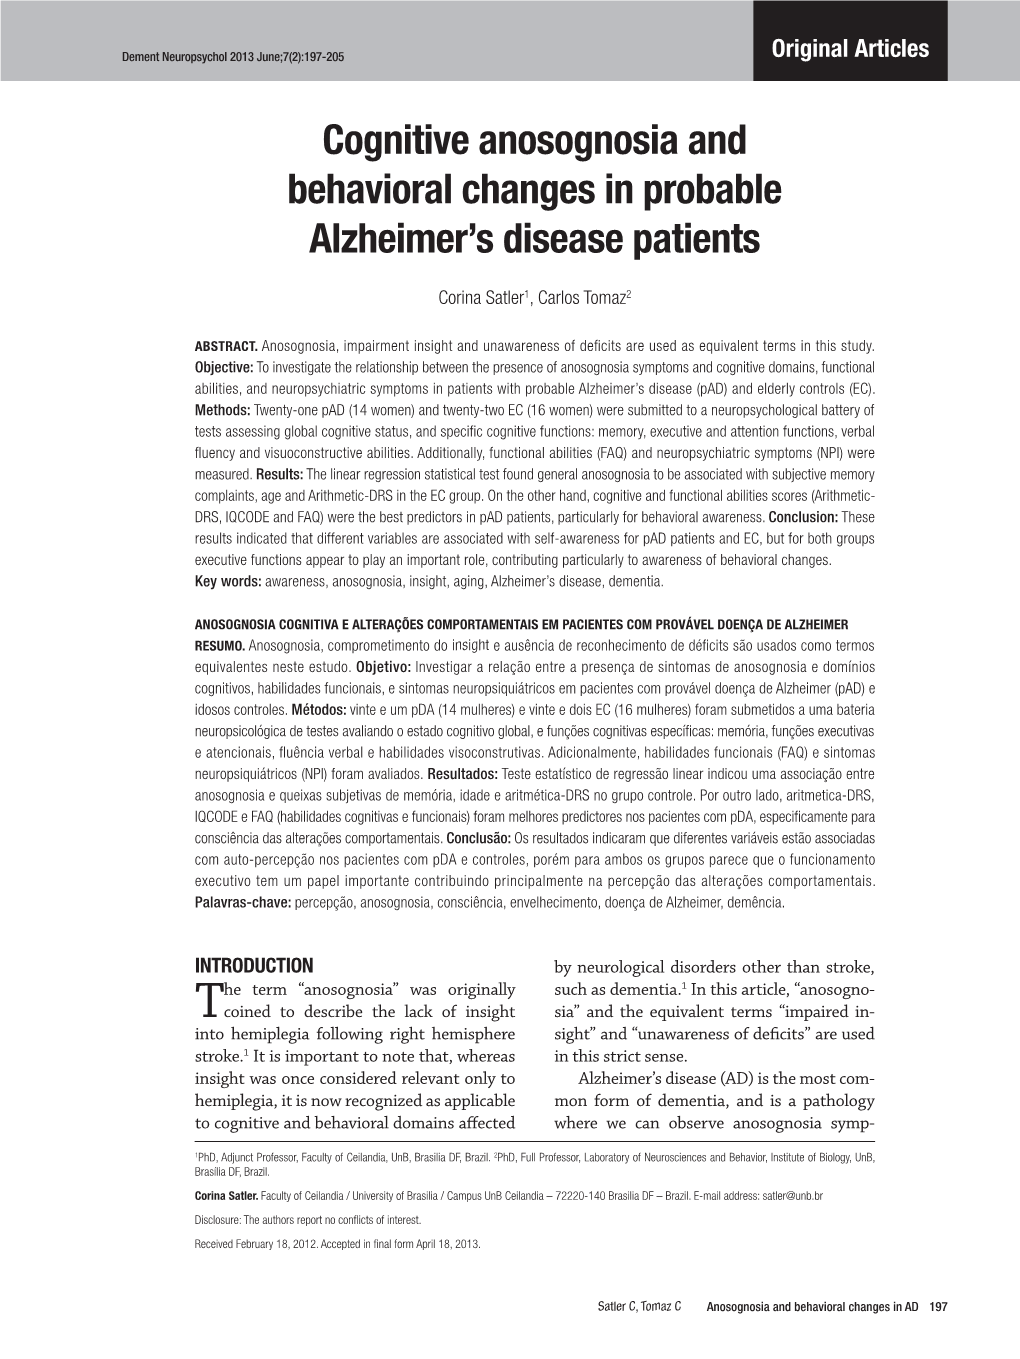 Cognitive Anosognosia and Behavioral Changes in Probable Alzheimer’S Disease Patients